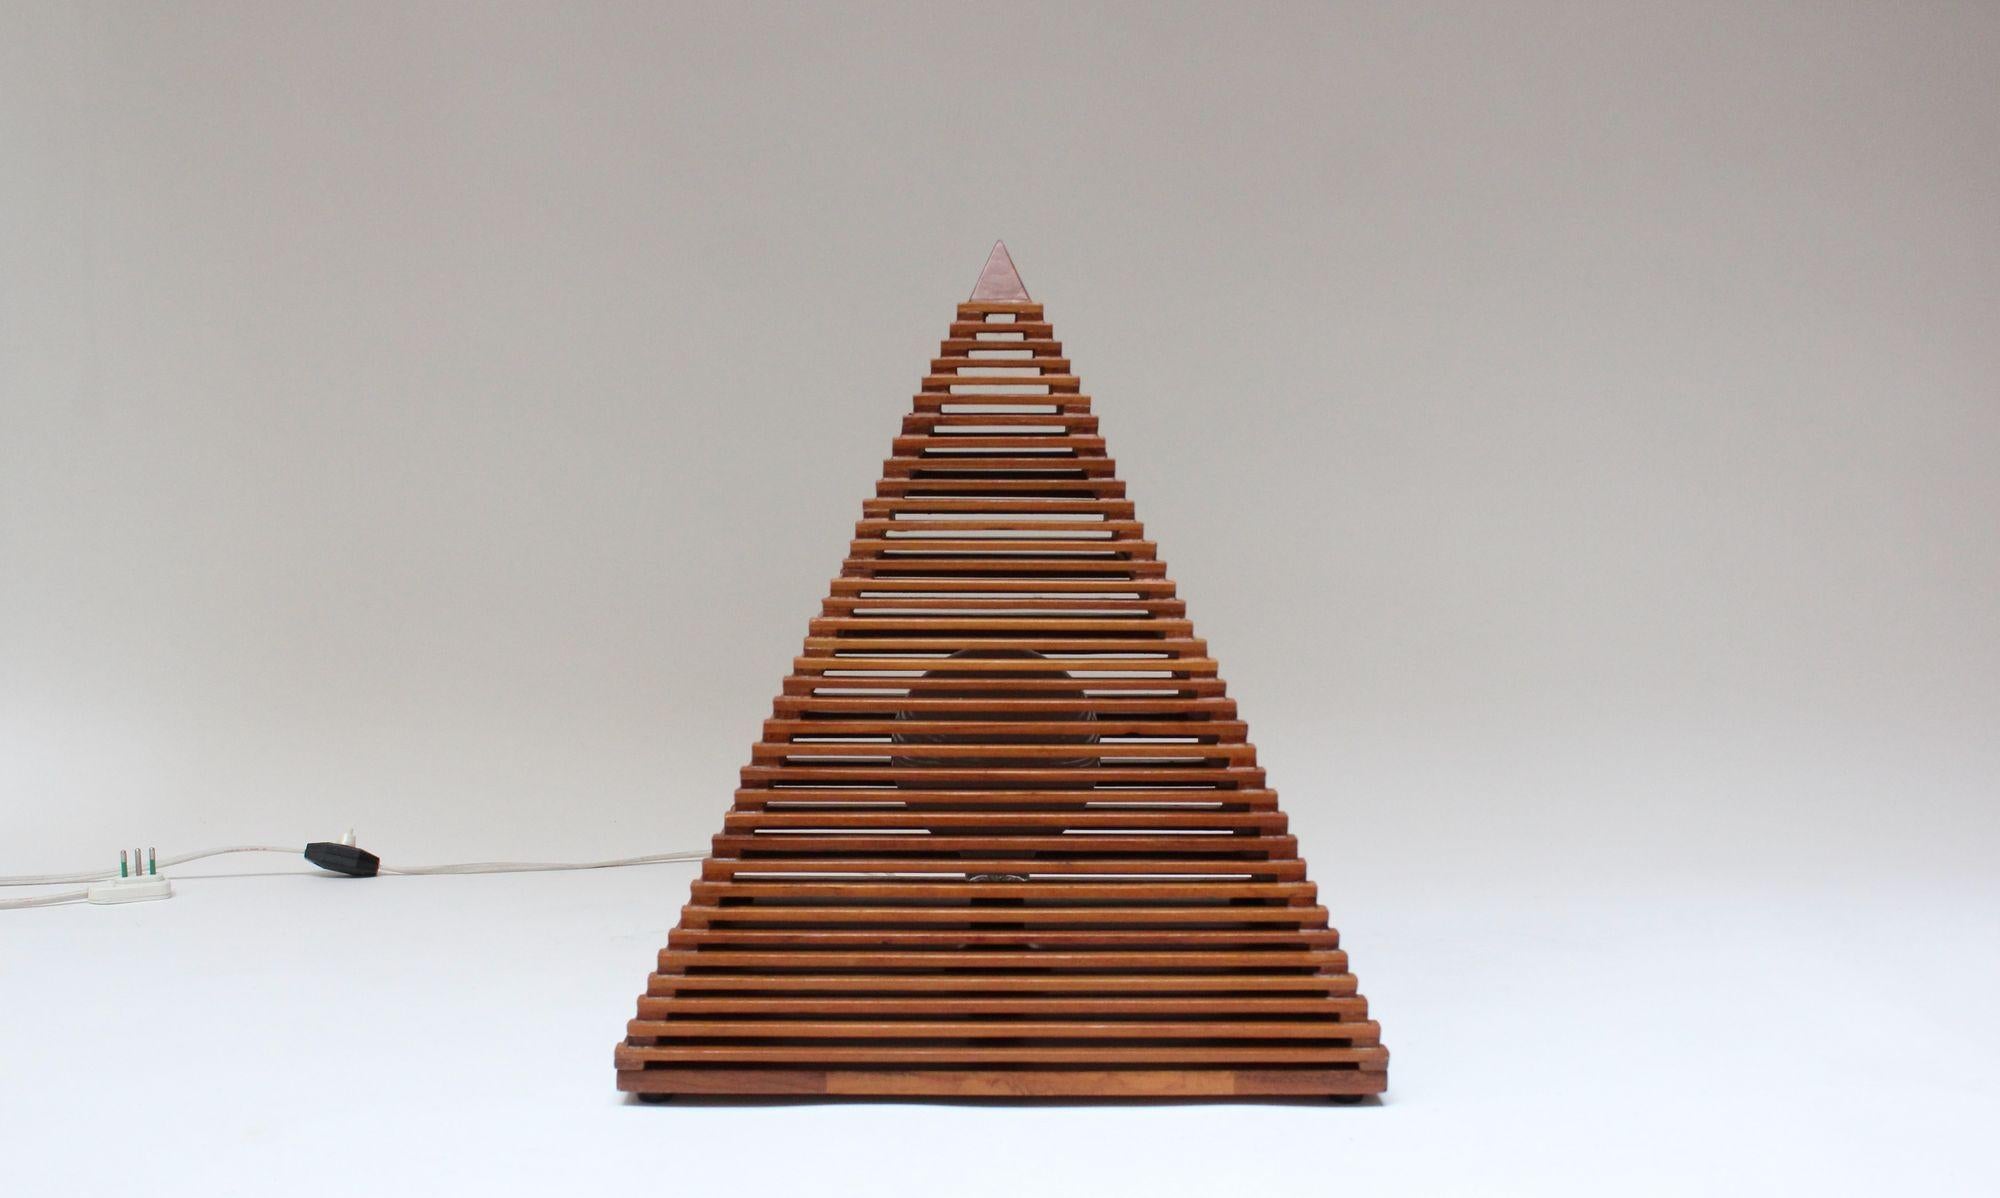 Vintage pyramid lamp composed of a slatted teak pyramid-form top supported by a staved-teak square base (ca. late 1970s, Italy).
Since the pyramid portion isn't mounted to the base, it can be removed and positioned as desired.
Very good, vintage